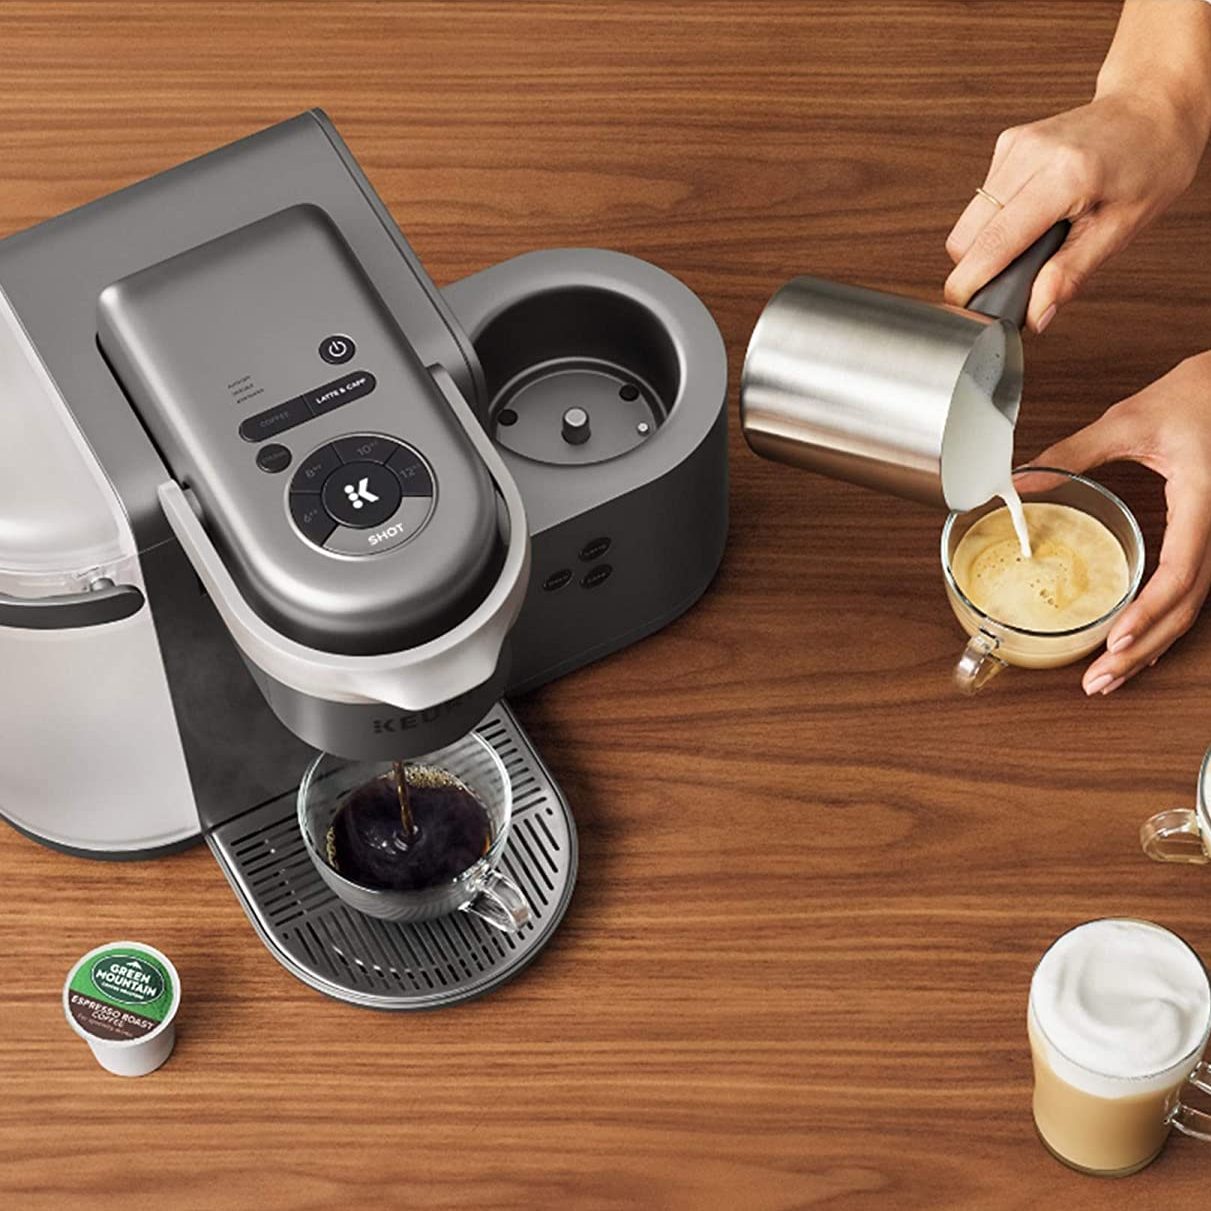 I'm a Shopping Writer, and I Can't Pass Up This Deal on Keurig's